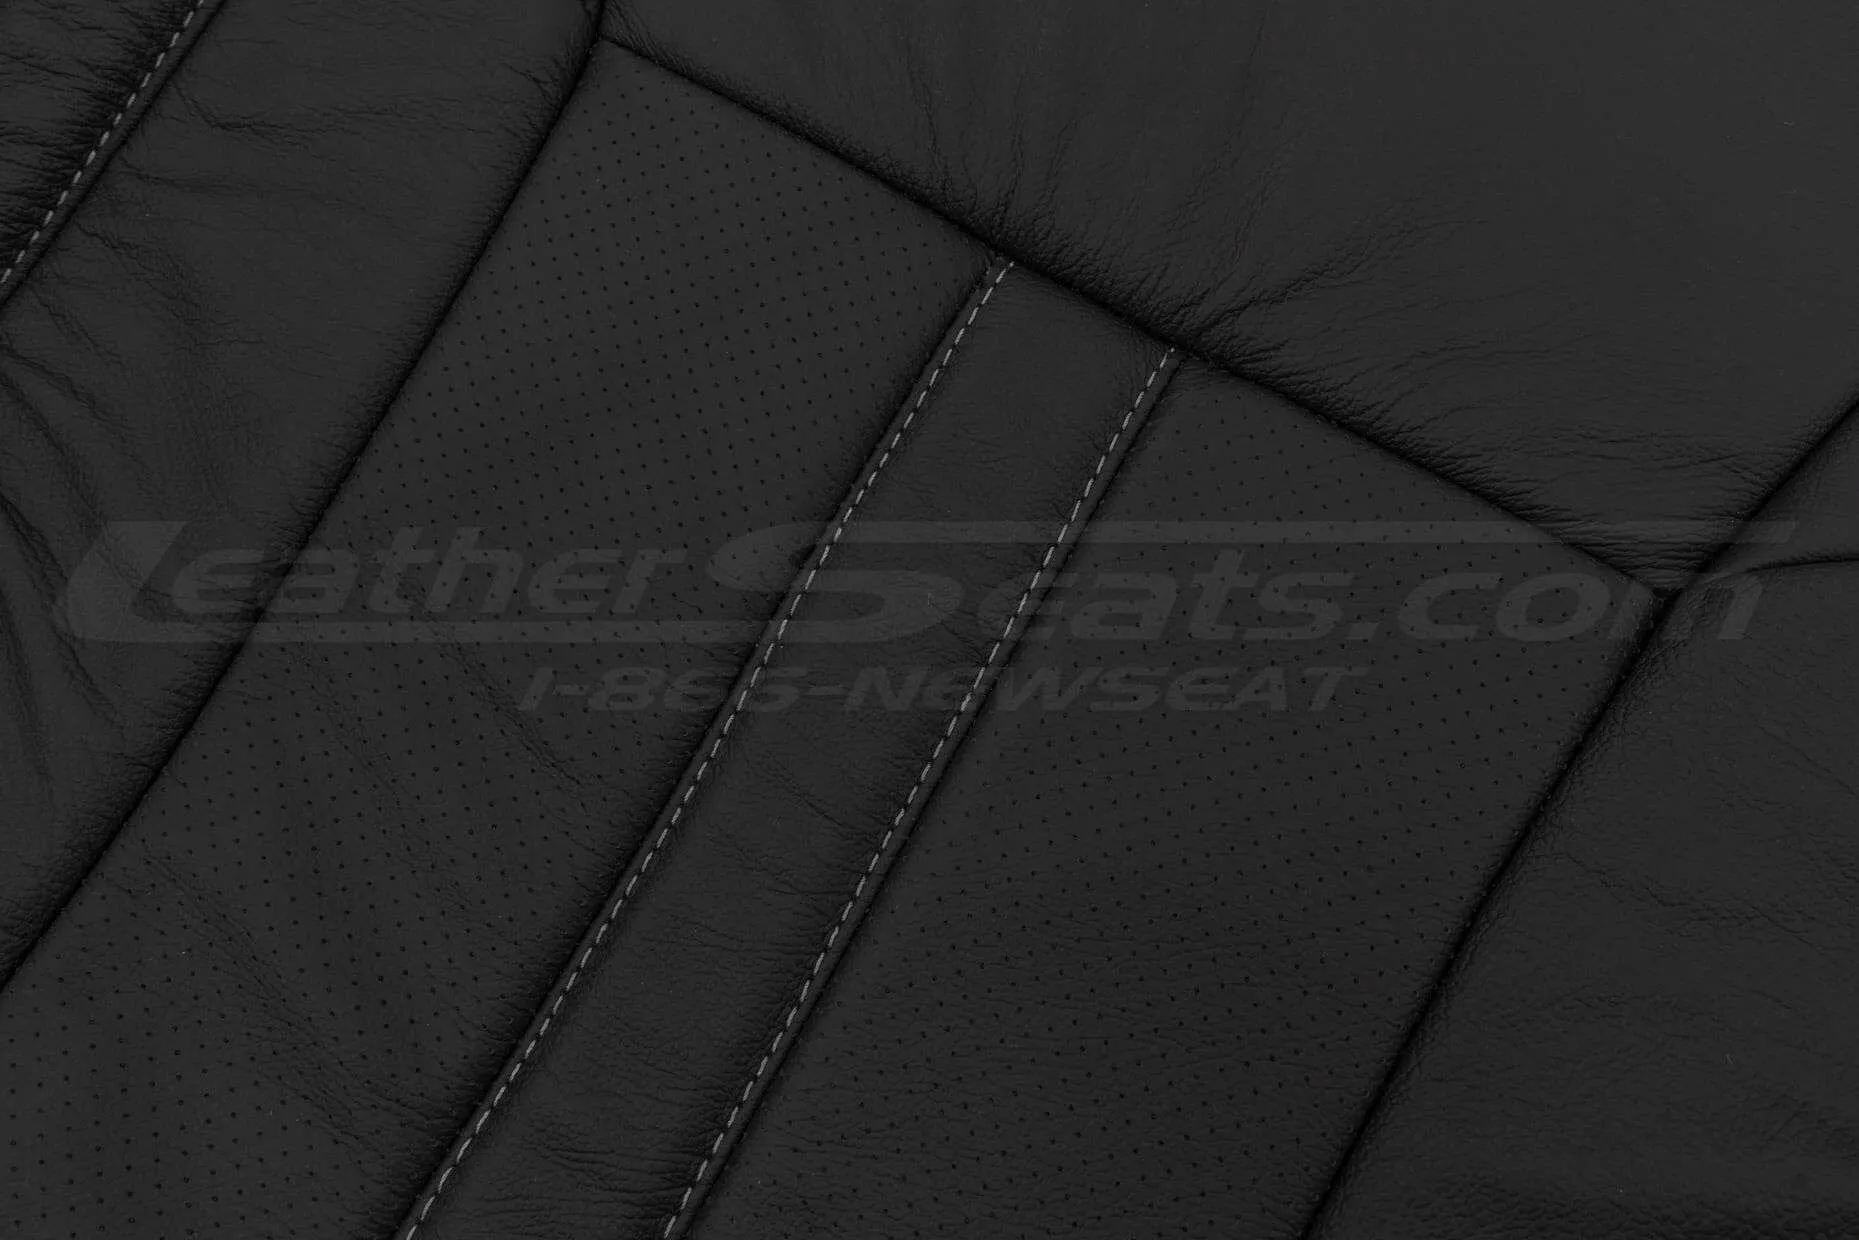 Perforated Inserts leather texture close-up